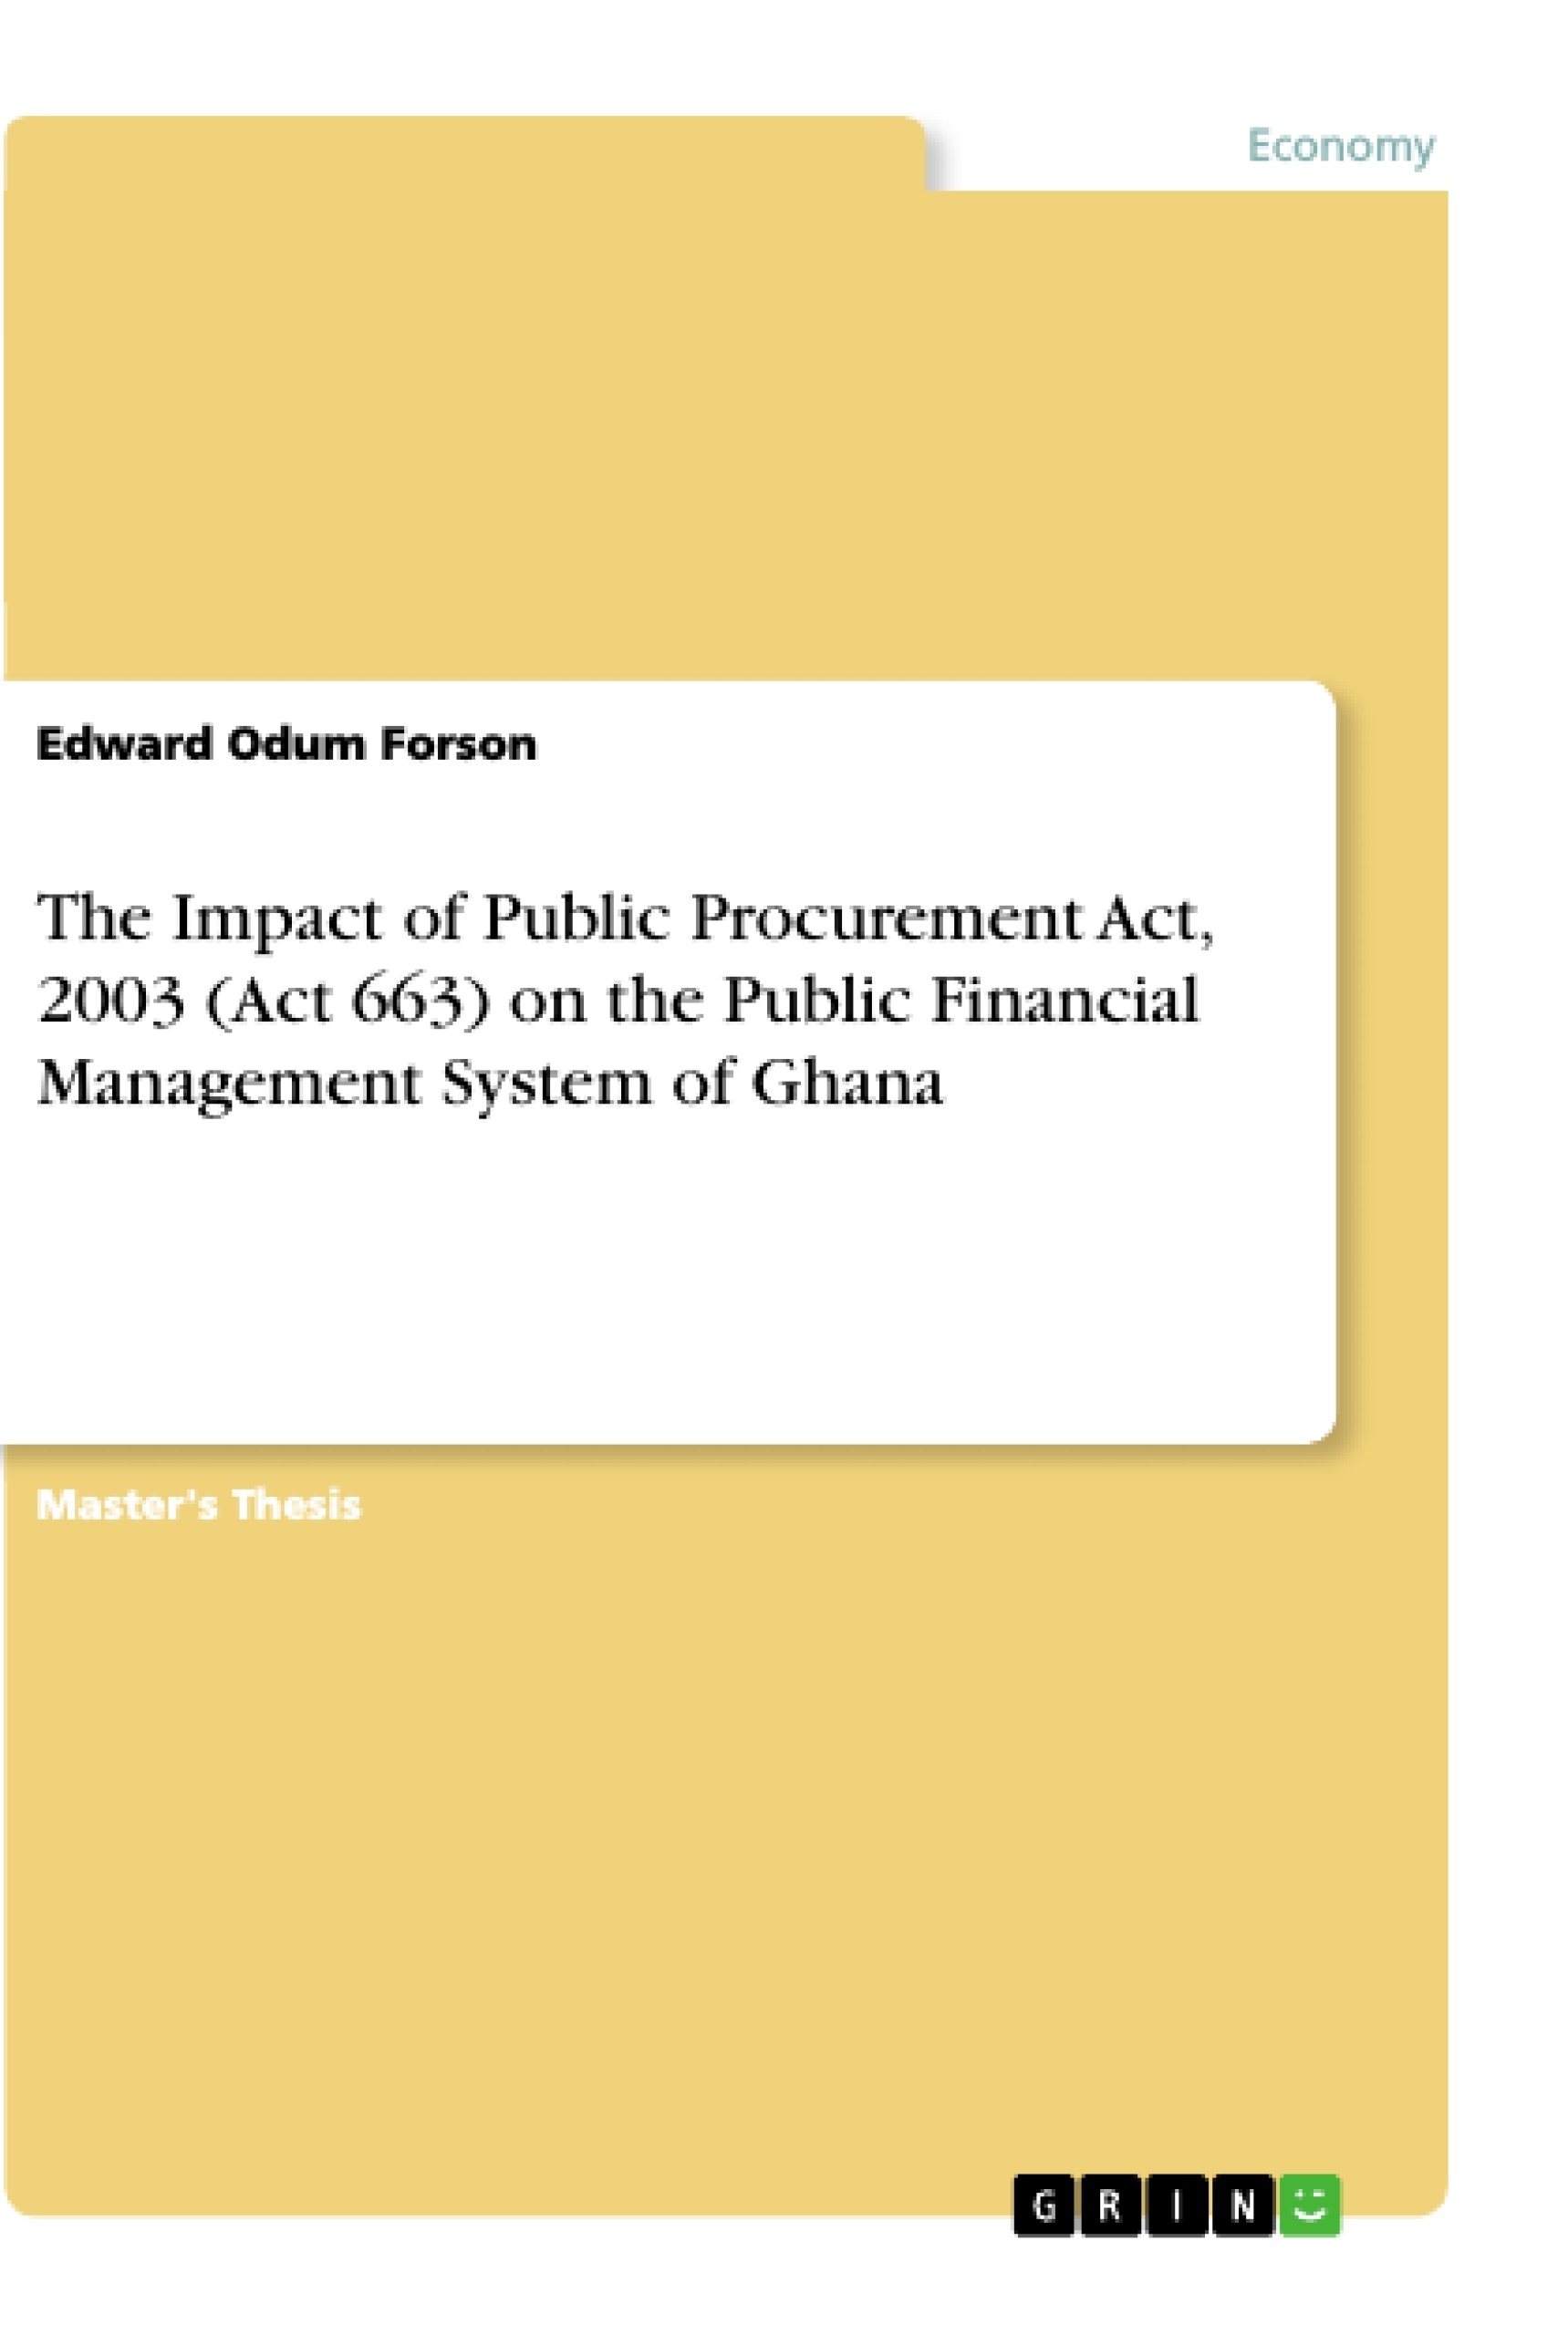 Titre: The Impact of Public Procurement Act, 2003 (Act 663) on the Public Financial Management System of Ghana